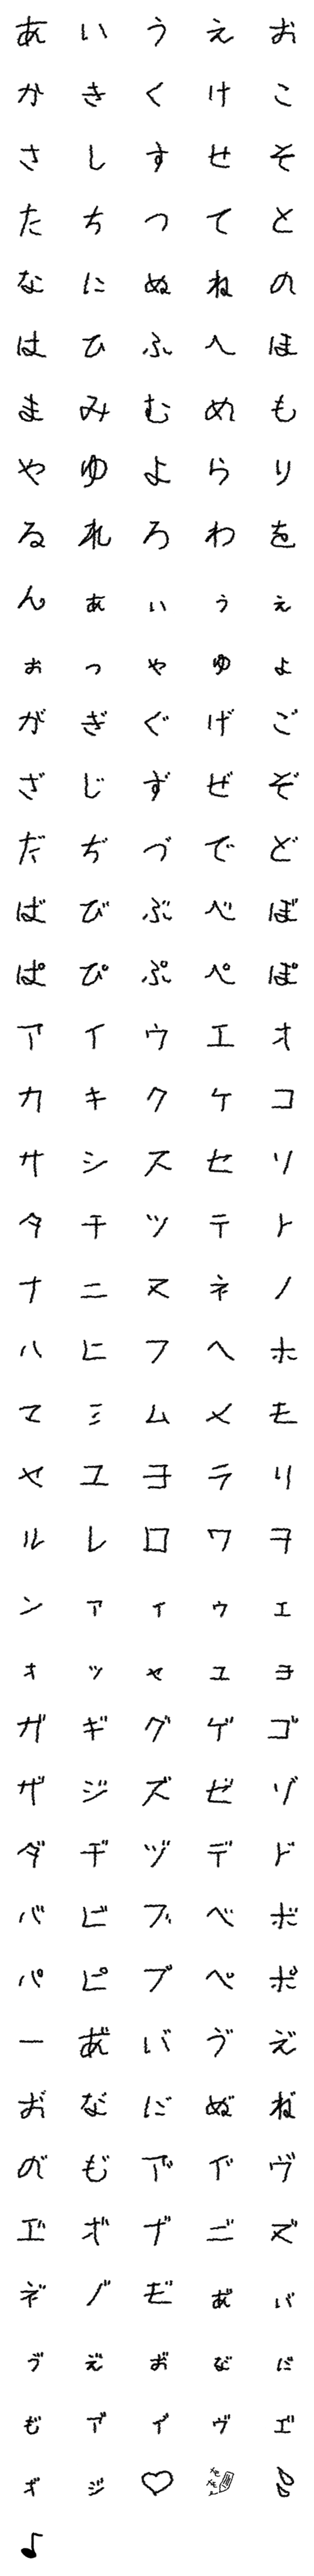 [LINE絵文字]へな文字 ひらがな編の画像一覧